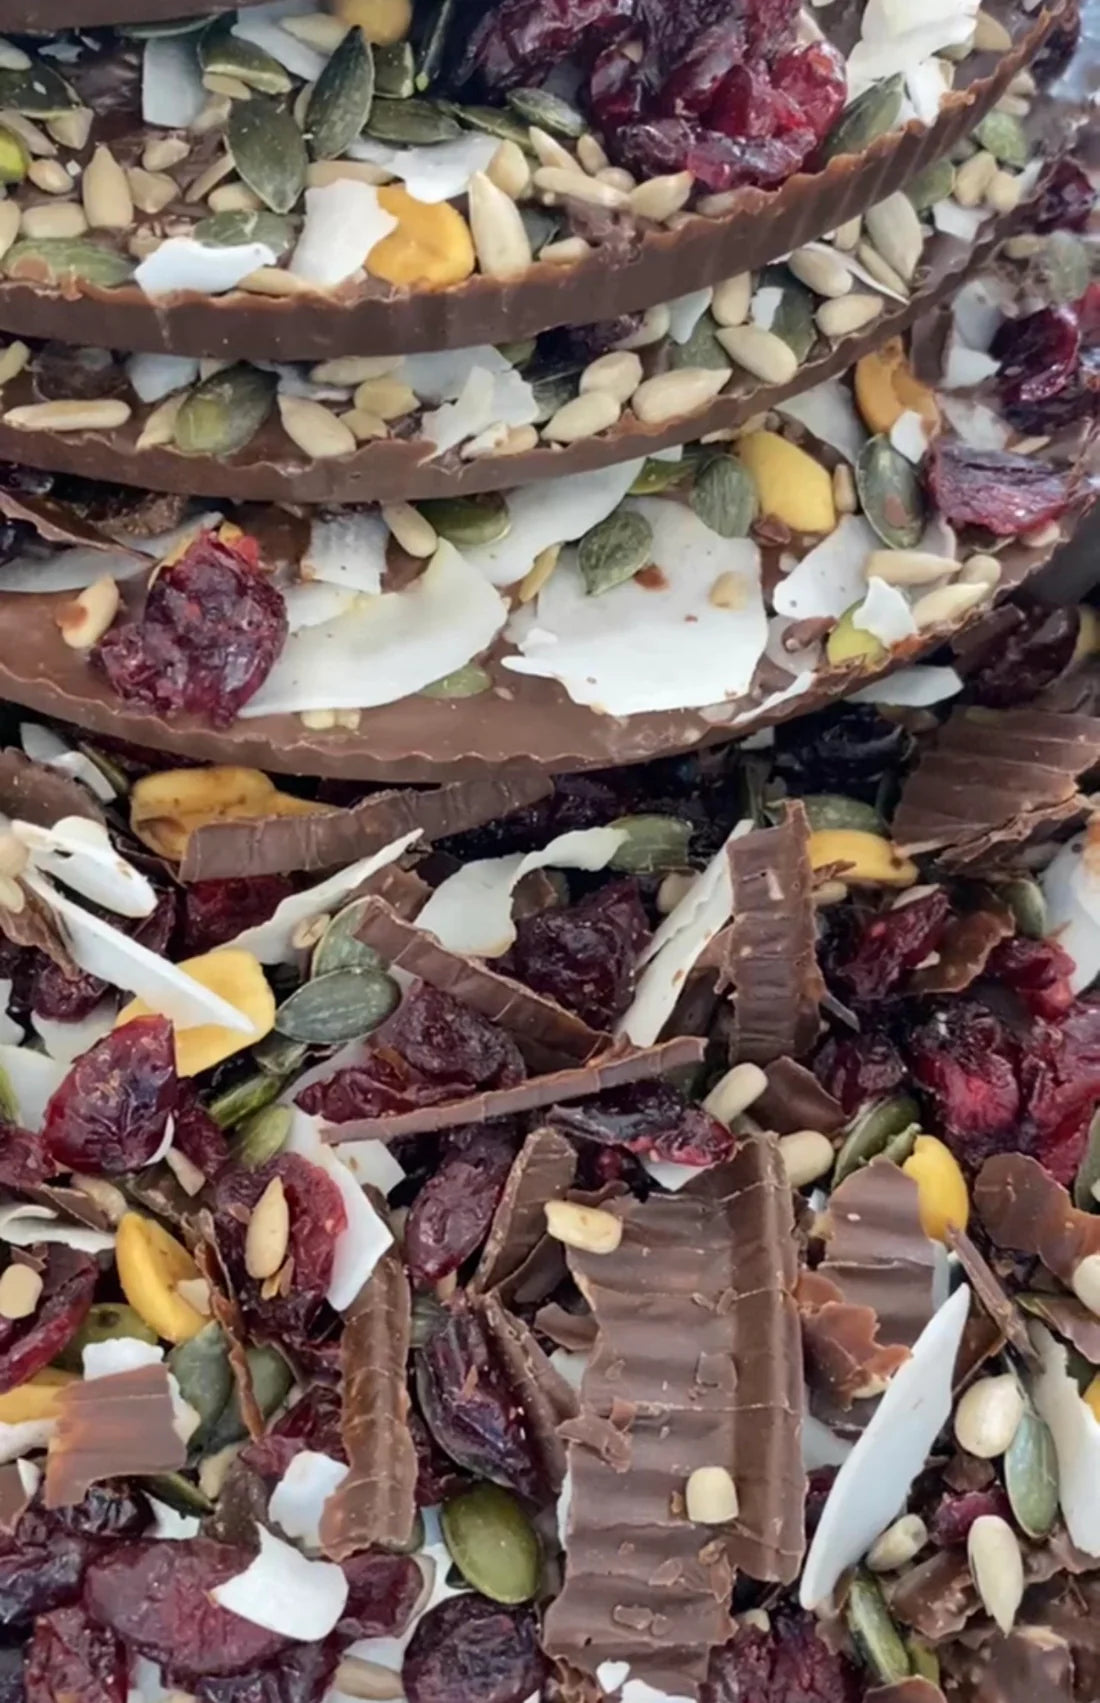 Icelandic handmade chocolate with cranberry, coconut, sunflower seeds, pumpkin seeds & salted nuts. - Topiceland